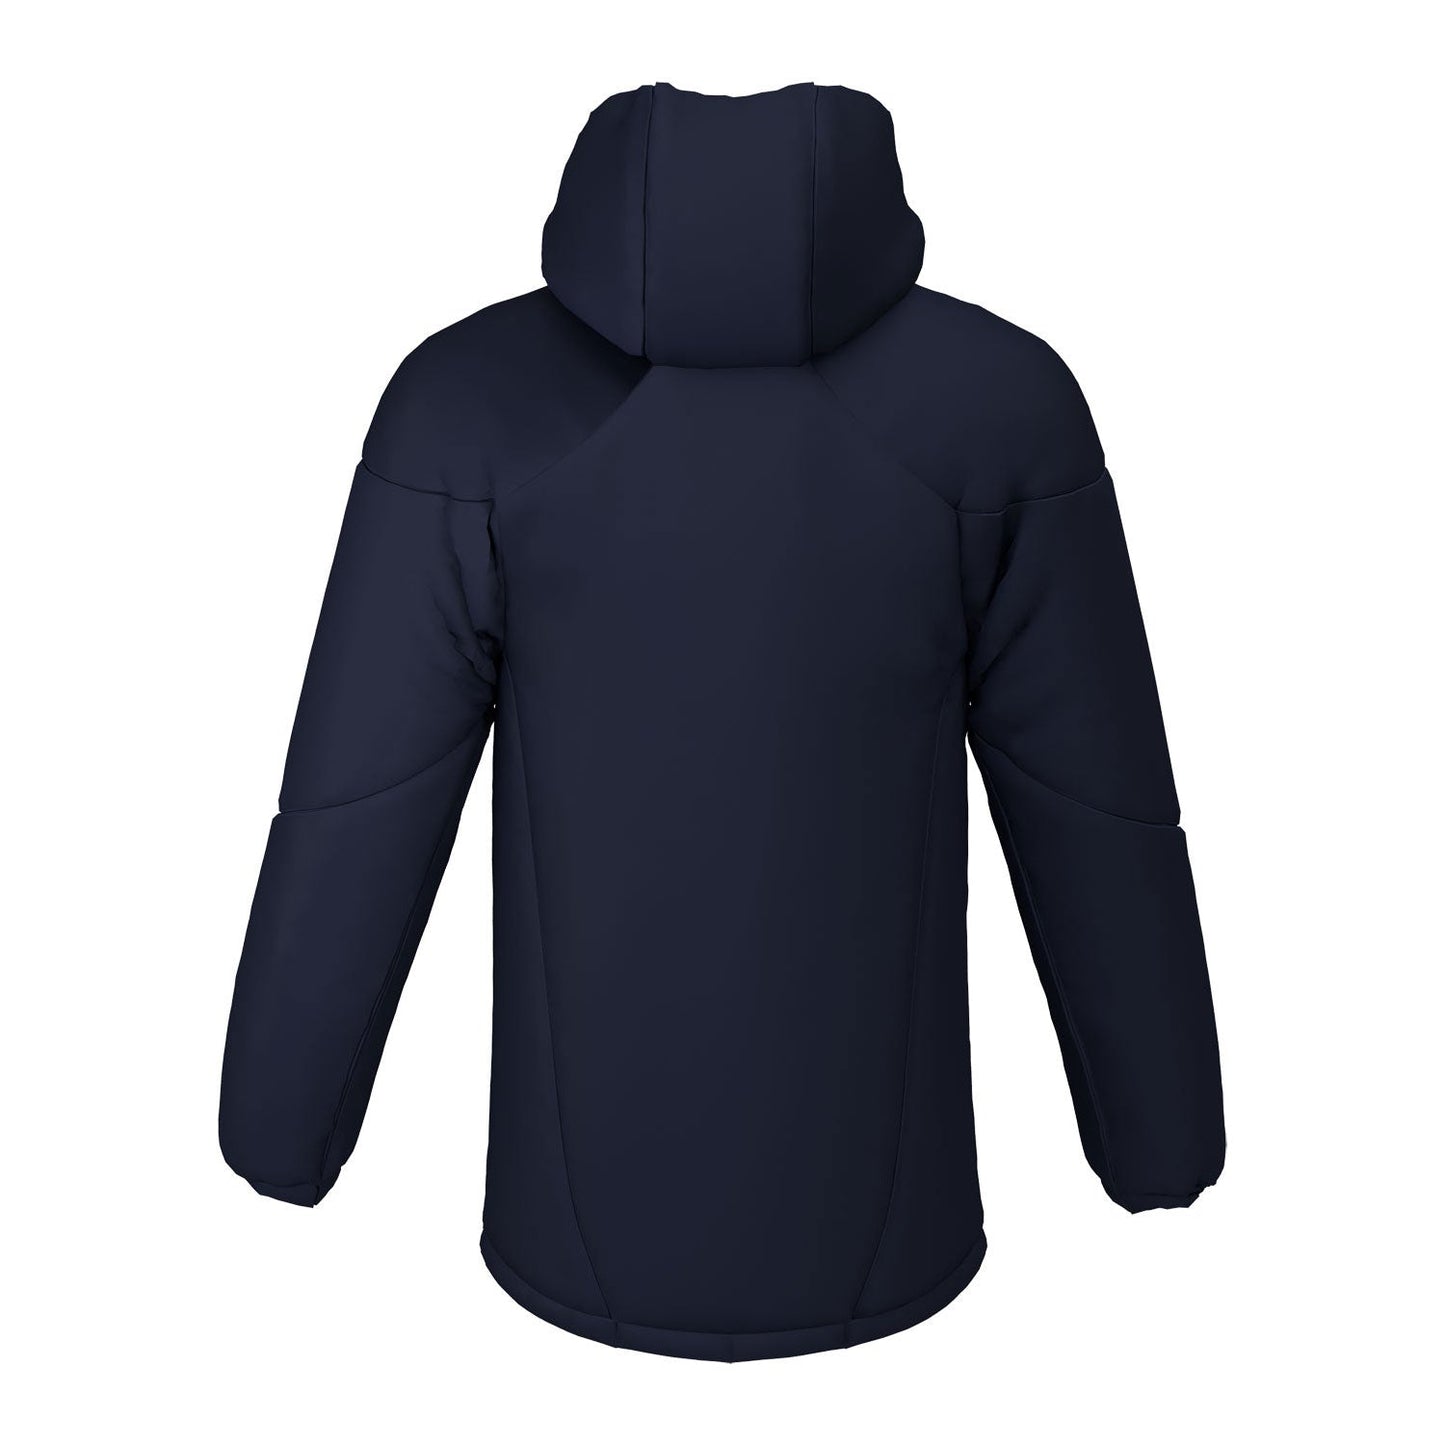 Oxford University Cycling Club Contoured Thermal Jacket